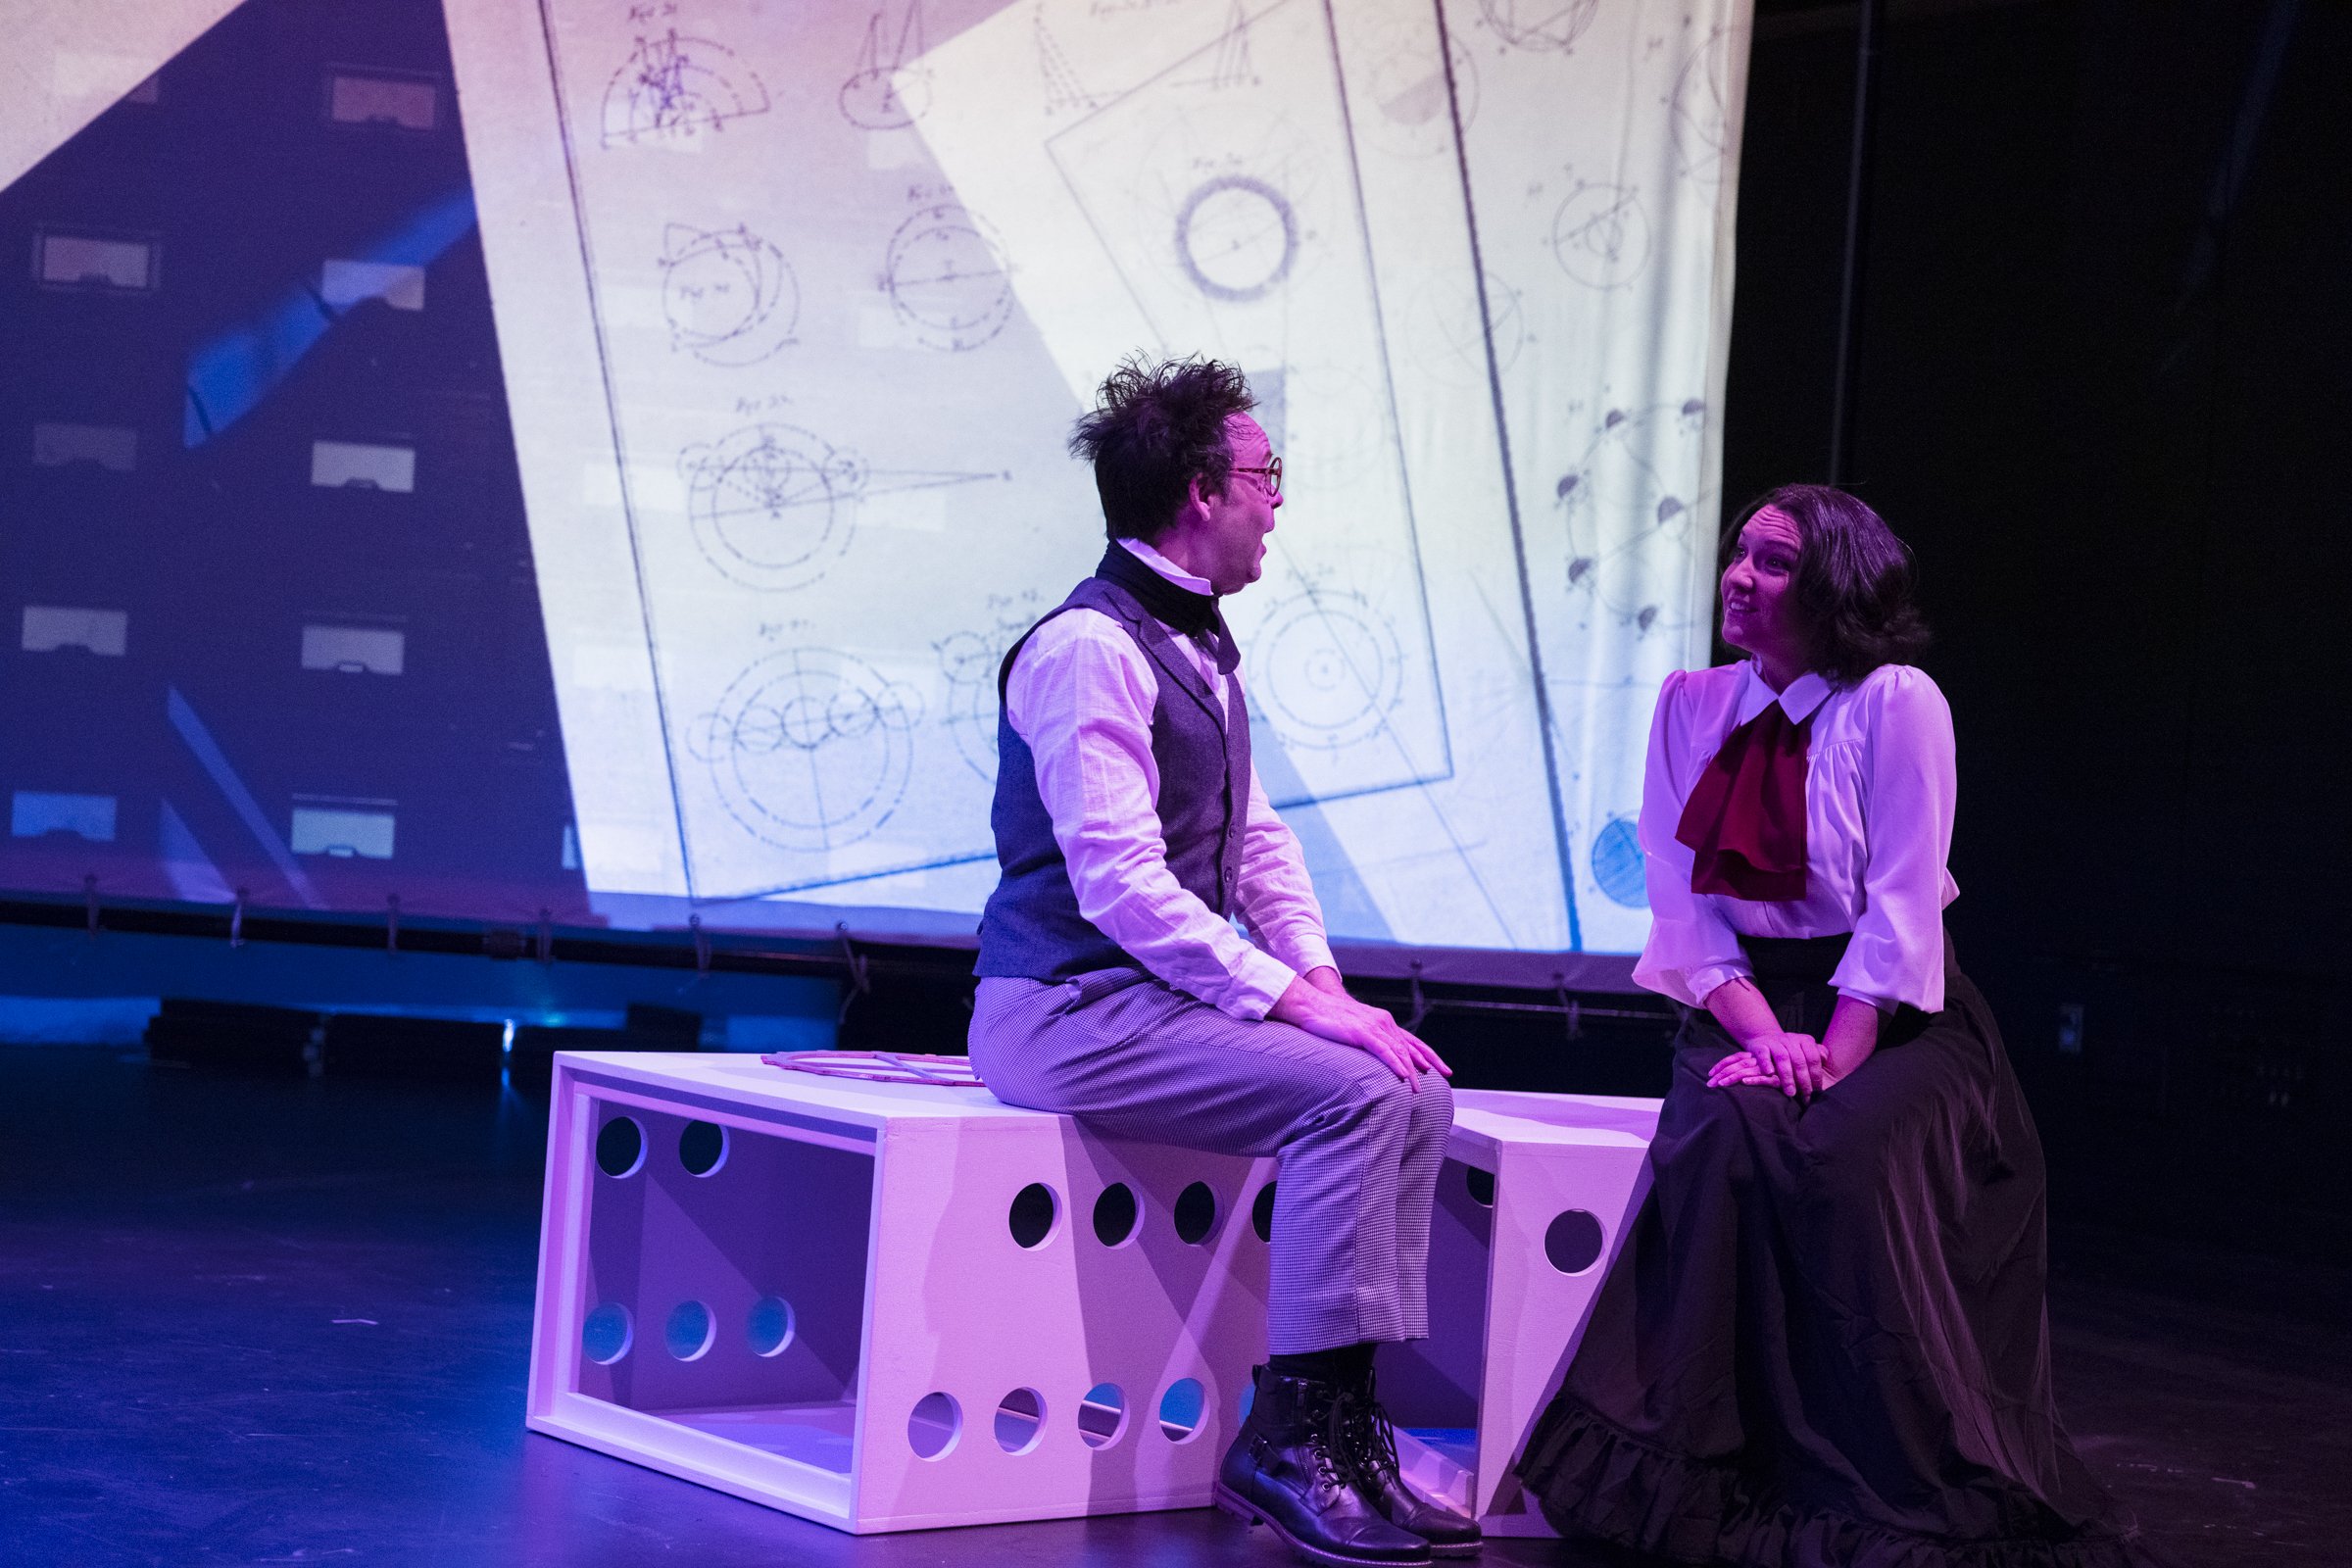 2. Aaron Engebreth as Charles Babbage and Aliana de la Guardia as Ada Lovelace talking about their inventions.jpg